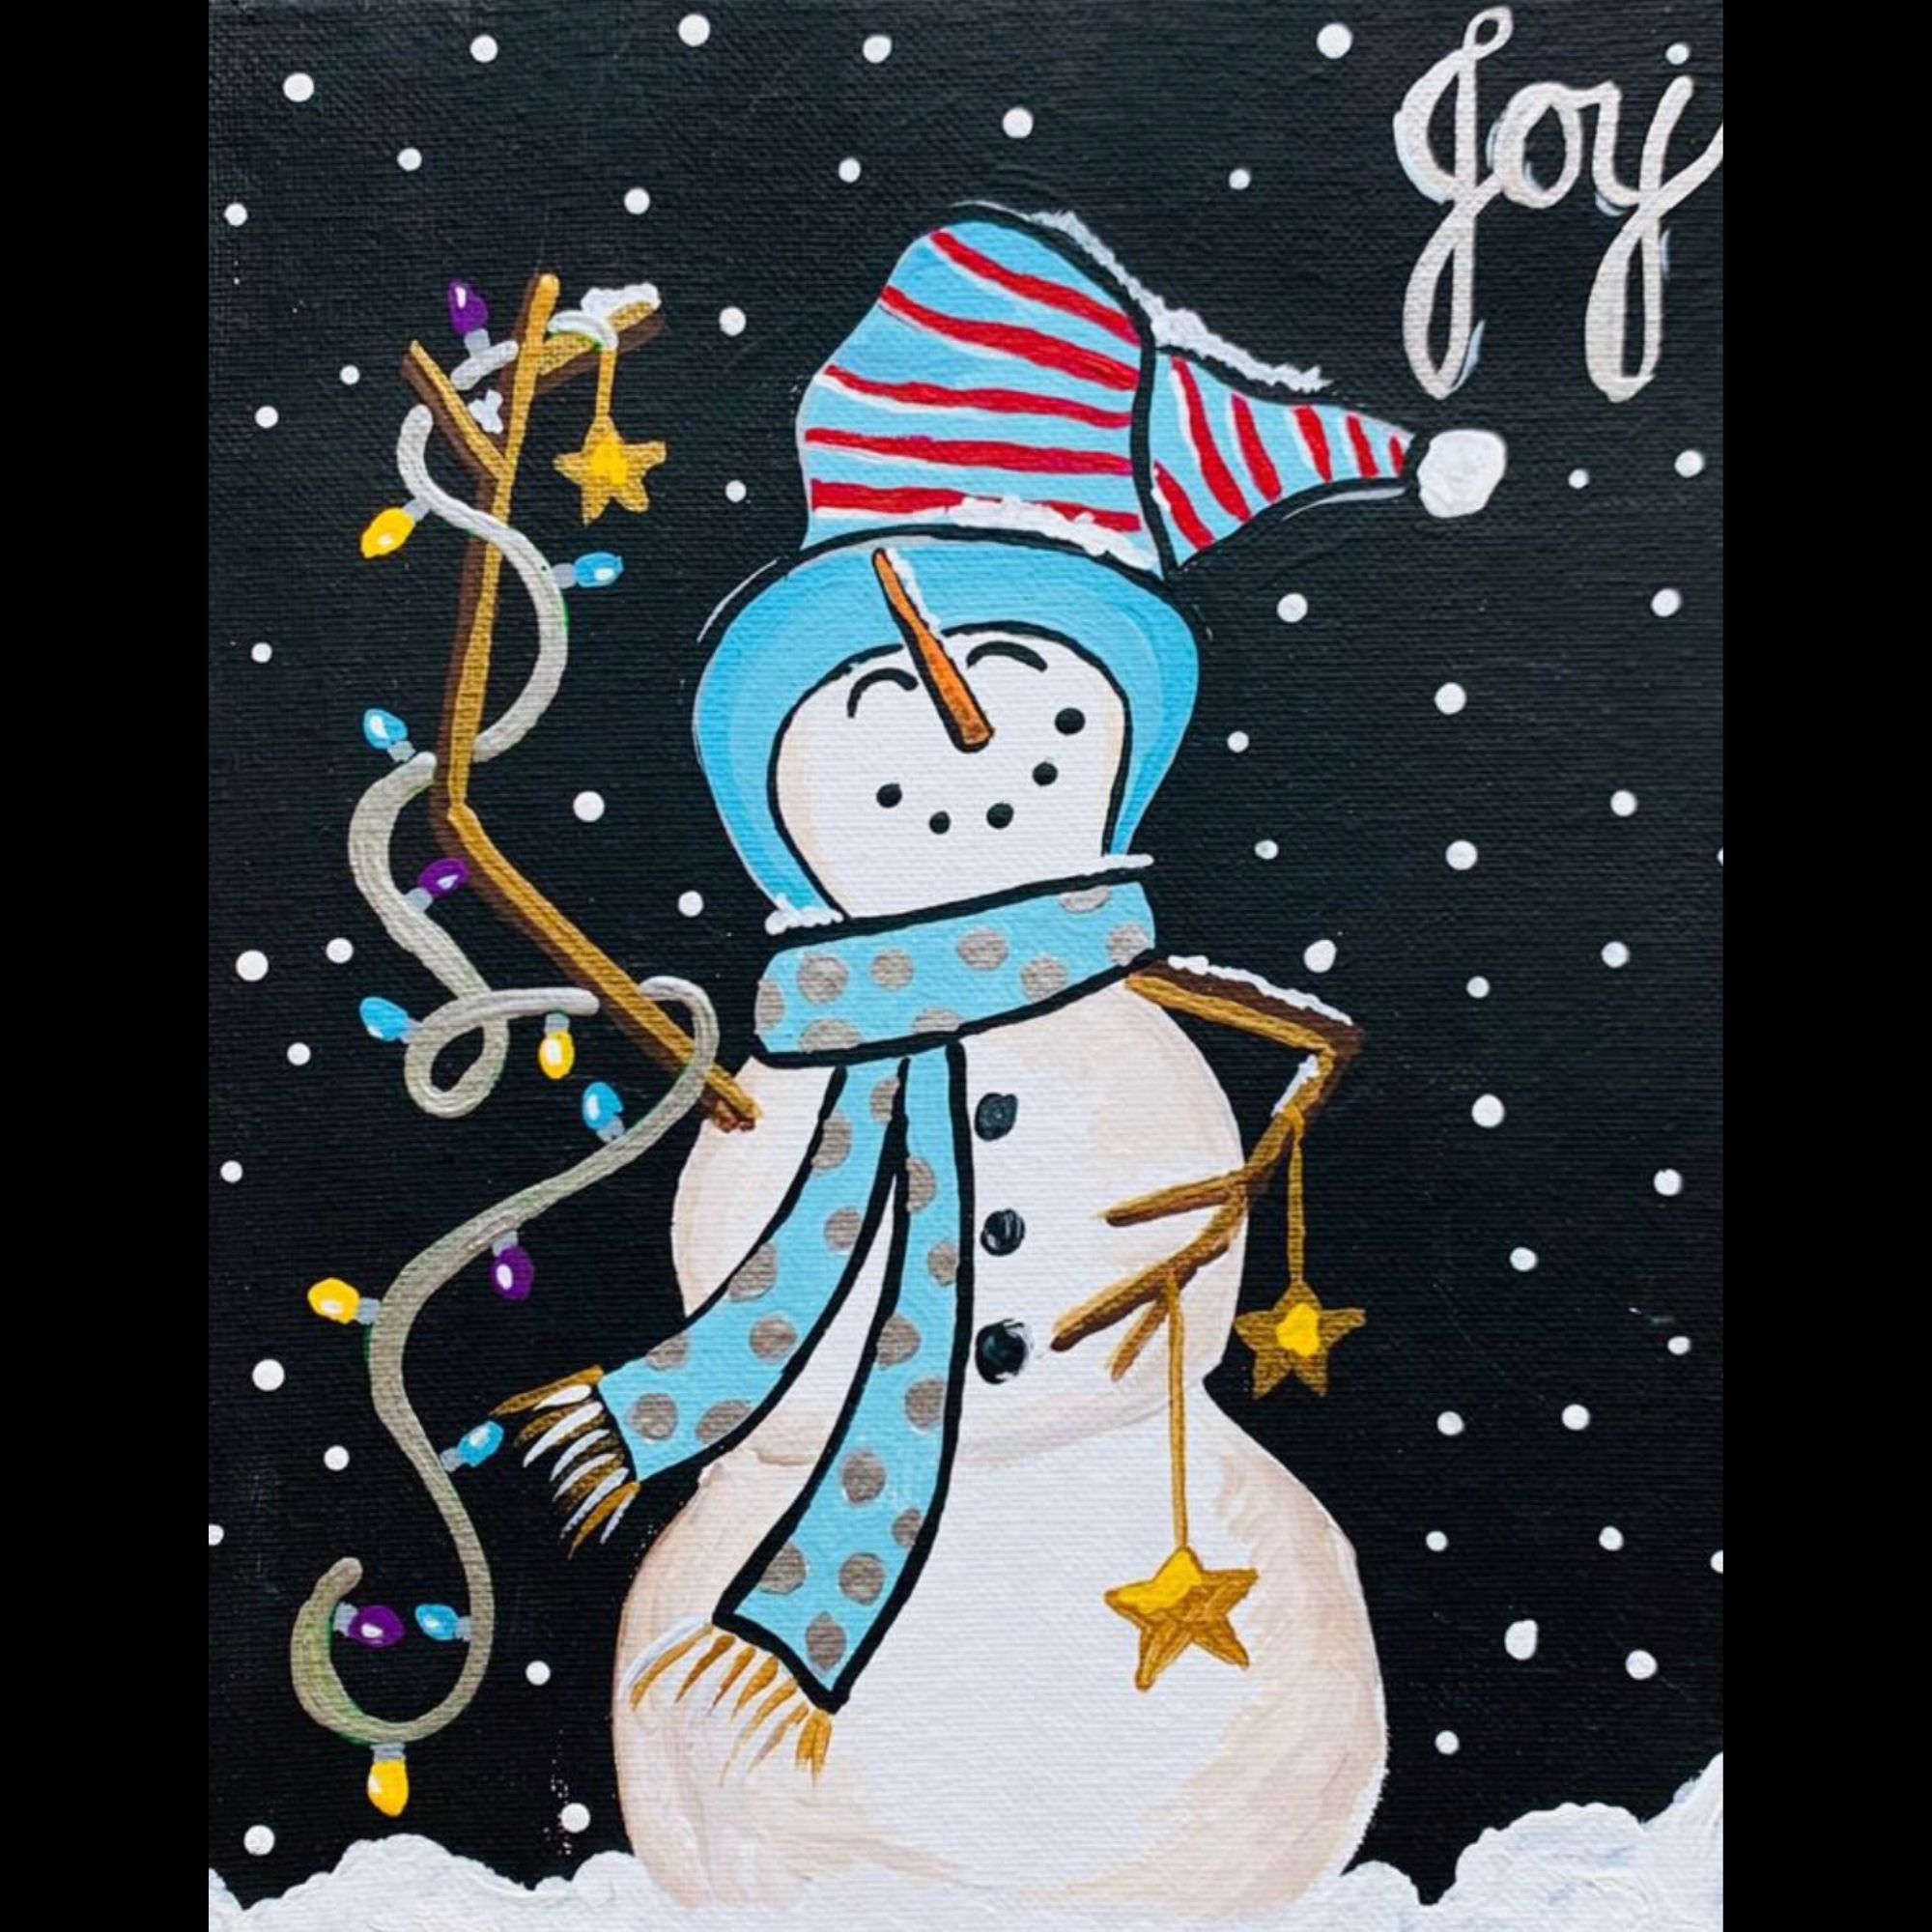 How to Paint a Snowman {Easy DIY} - Texas Art and Soul - Create a Paint  Party Business Online